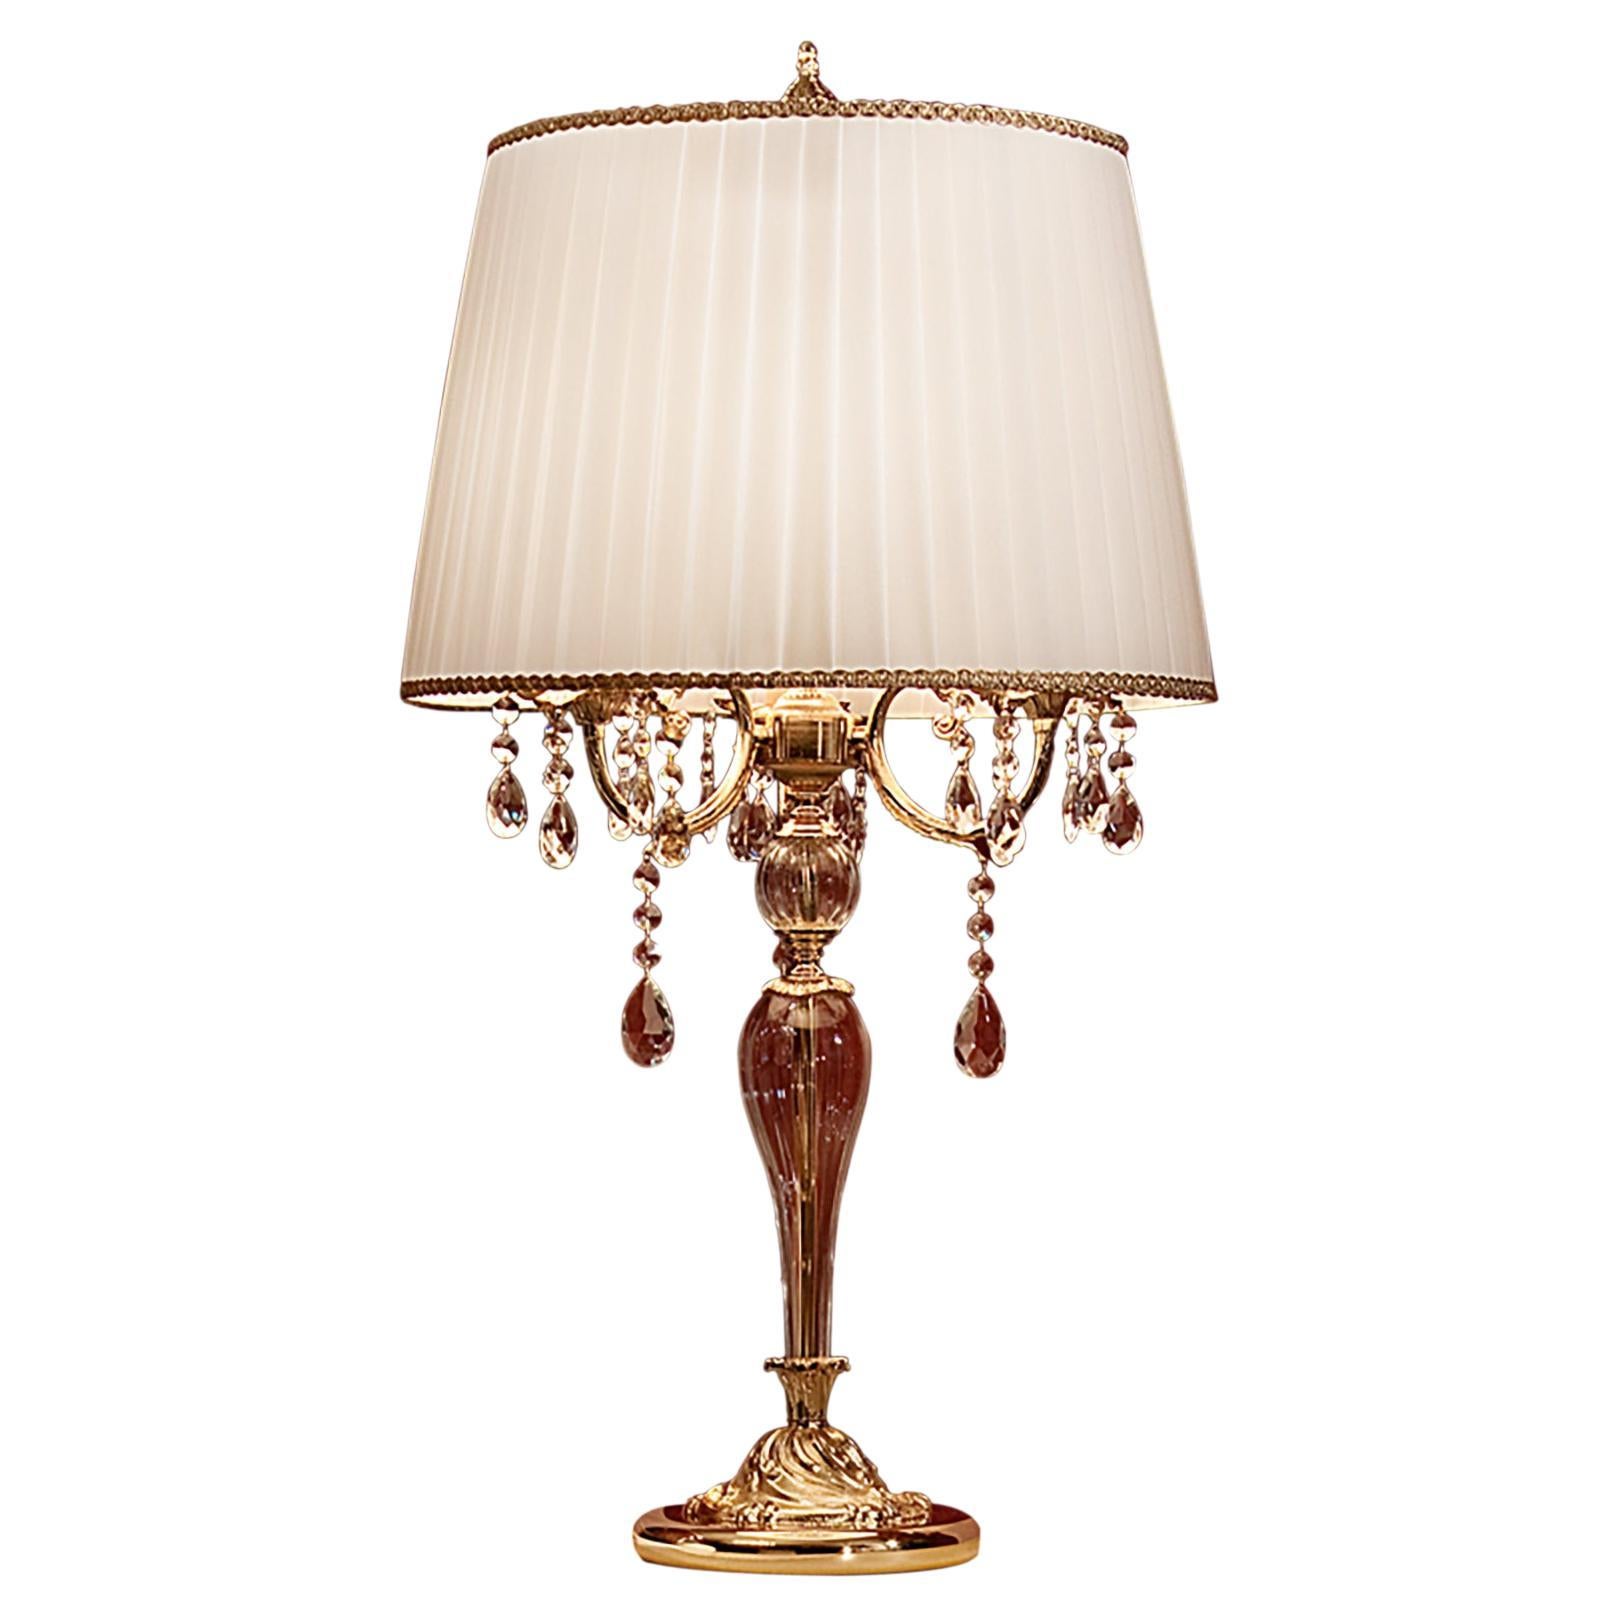 Royal Palace 24kt Antique Gold Plated 3-Lights Table Lamp with Crystal Pendants For Sale